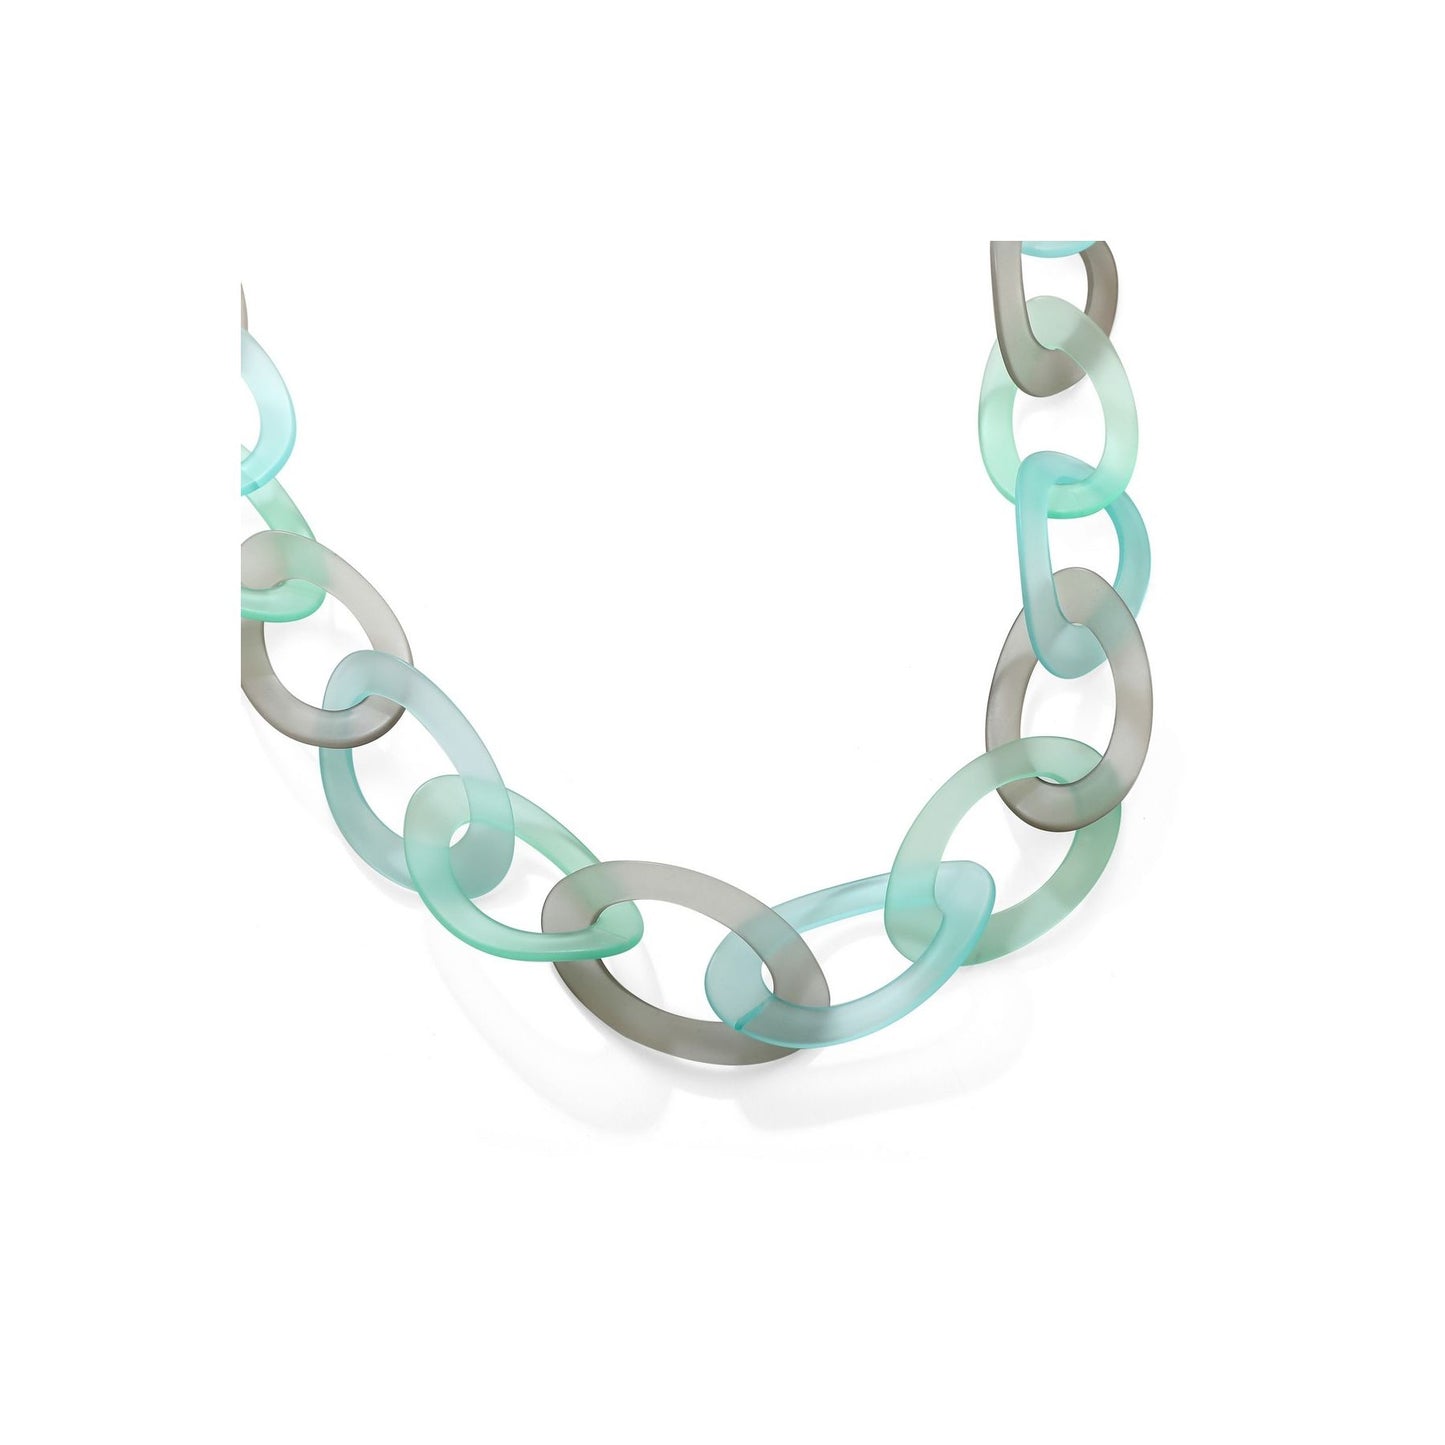 Skimming Stones - Blue Green and Grey Sheer Link Long Necklace - from Frinkle